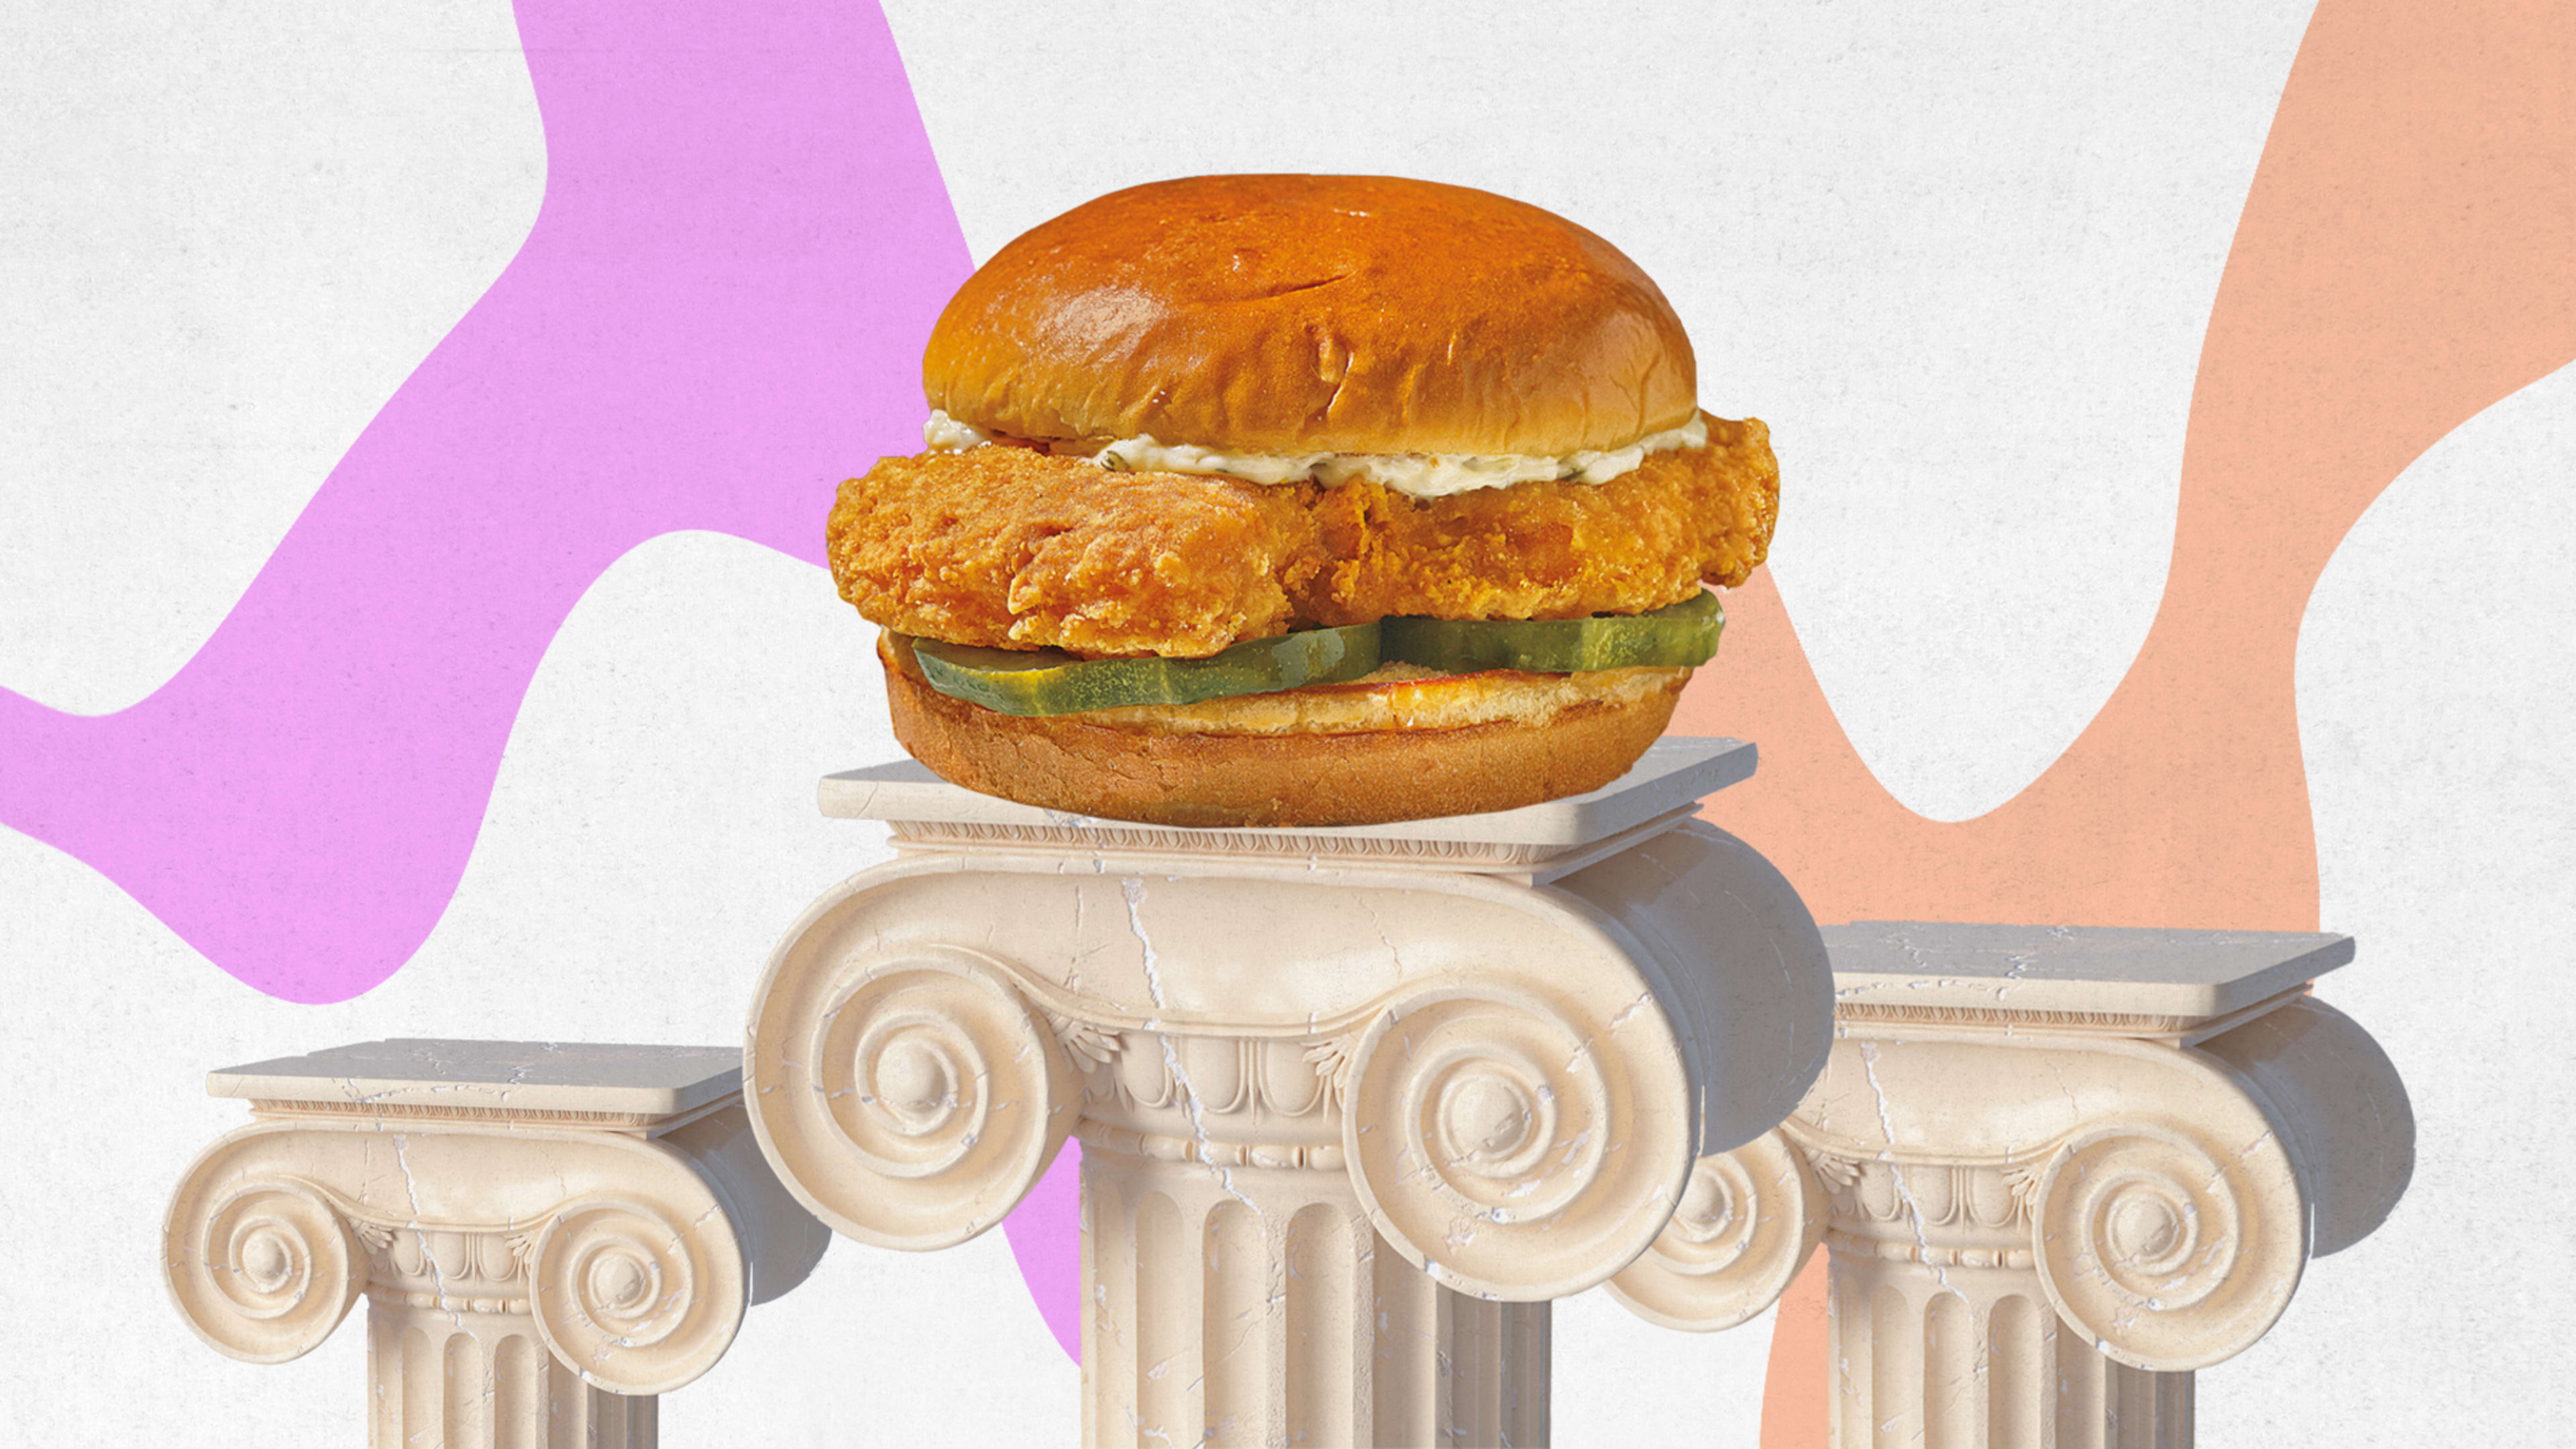 Popeyes has a new fish sandwich, but can it top that viral chicken magic?